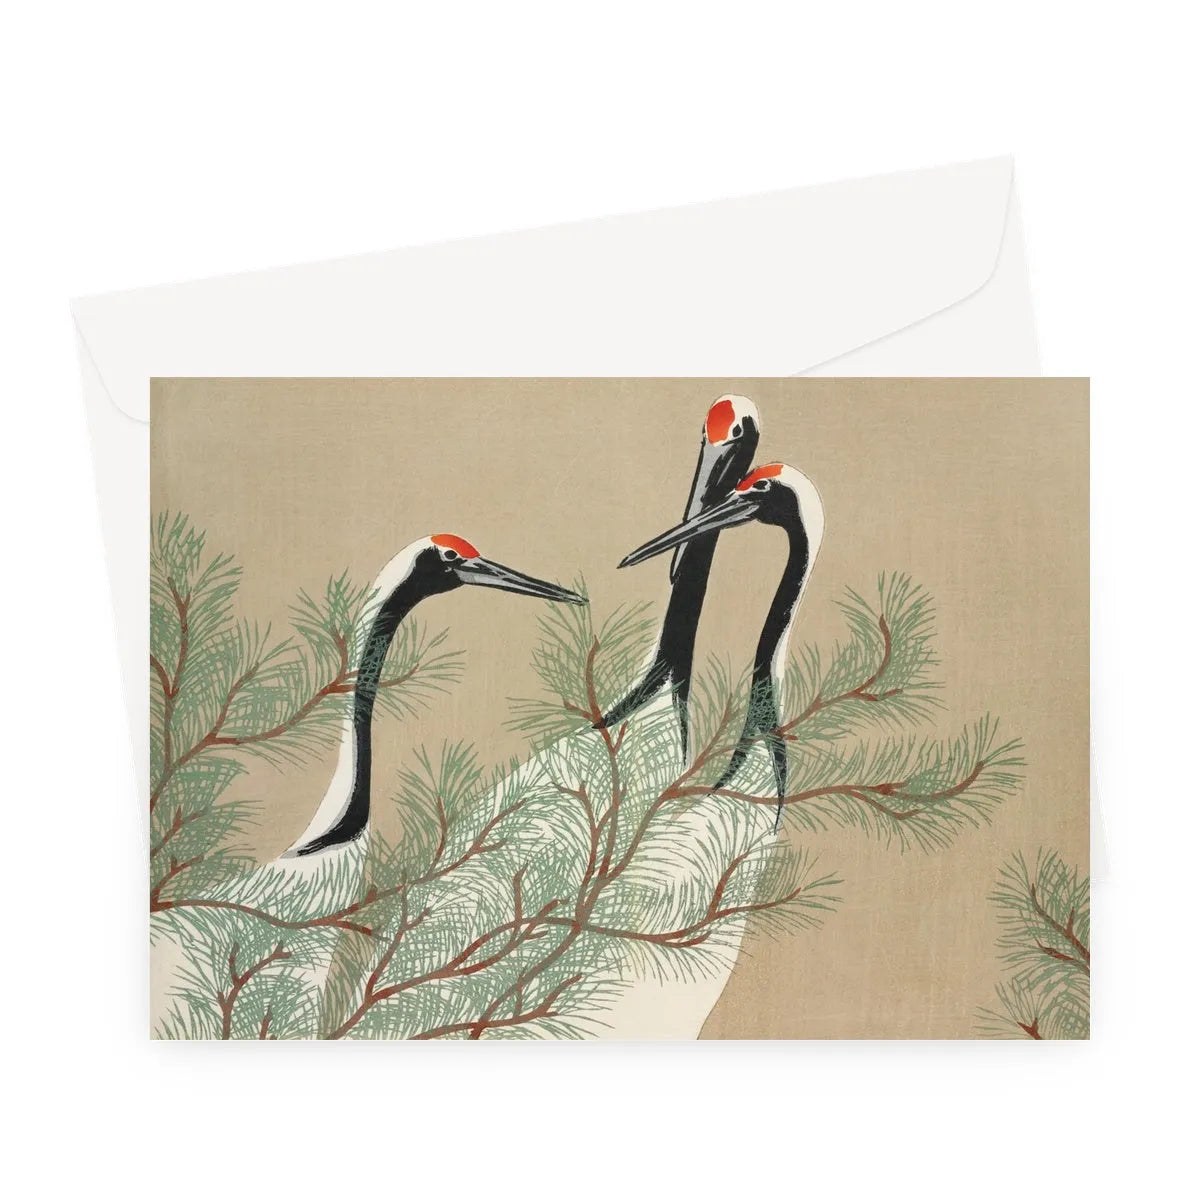 Cranes From Momoyogusa By Kamisaka Sekka Greeting Card - A5 Landscape / 1 Card - Greeting & Note Cards - Aesthetic Art